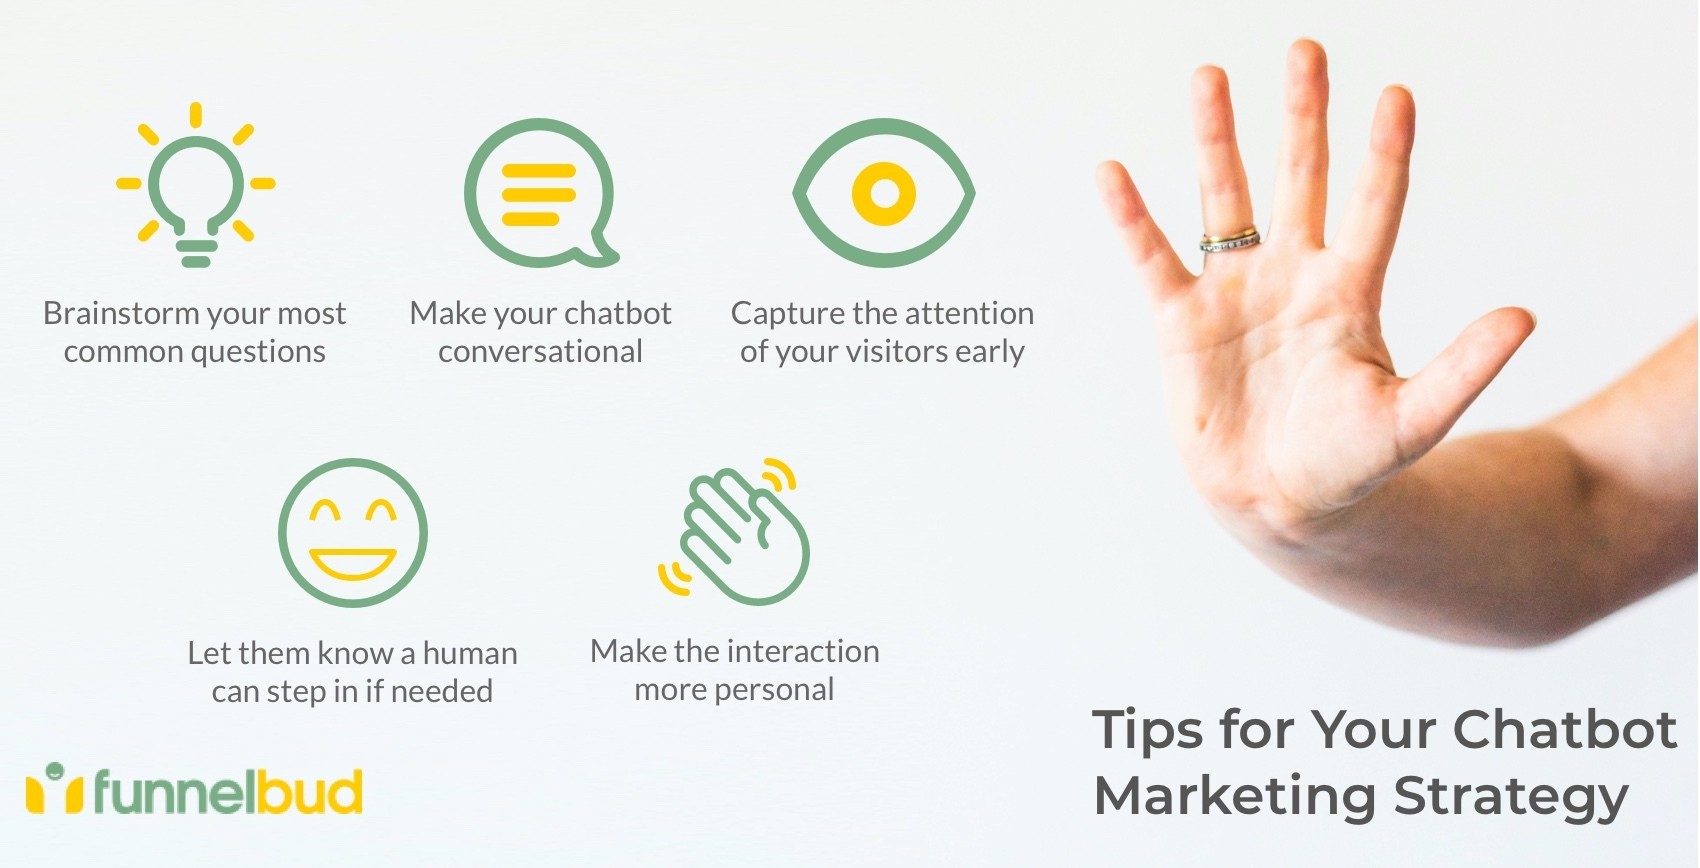 Tips for Chatbot Marketing